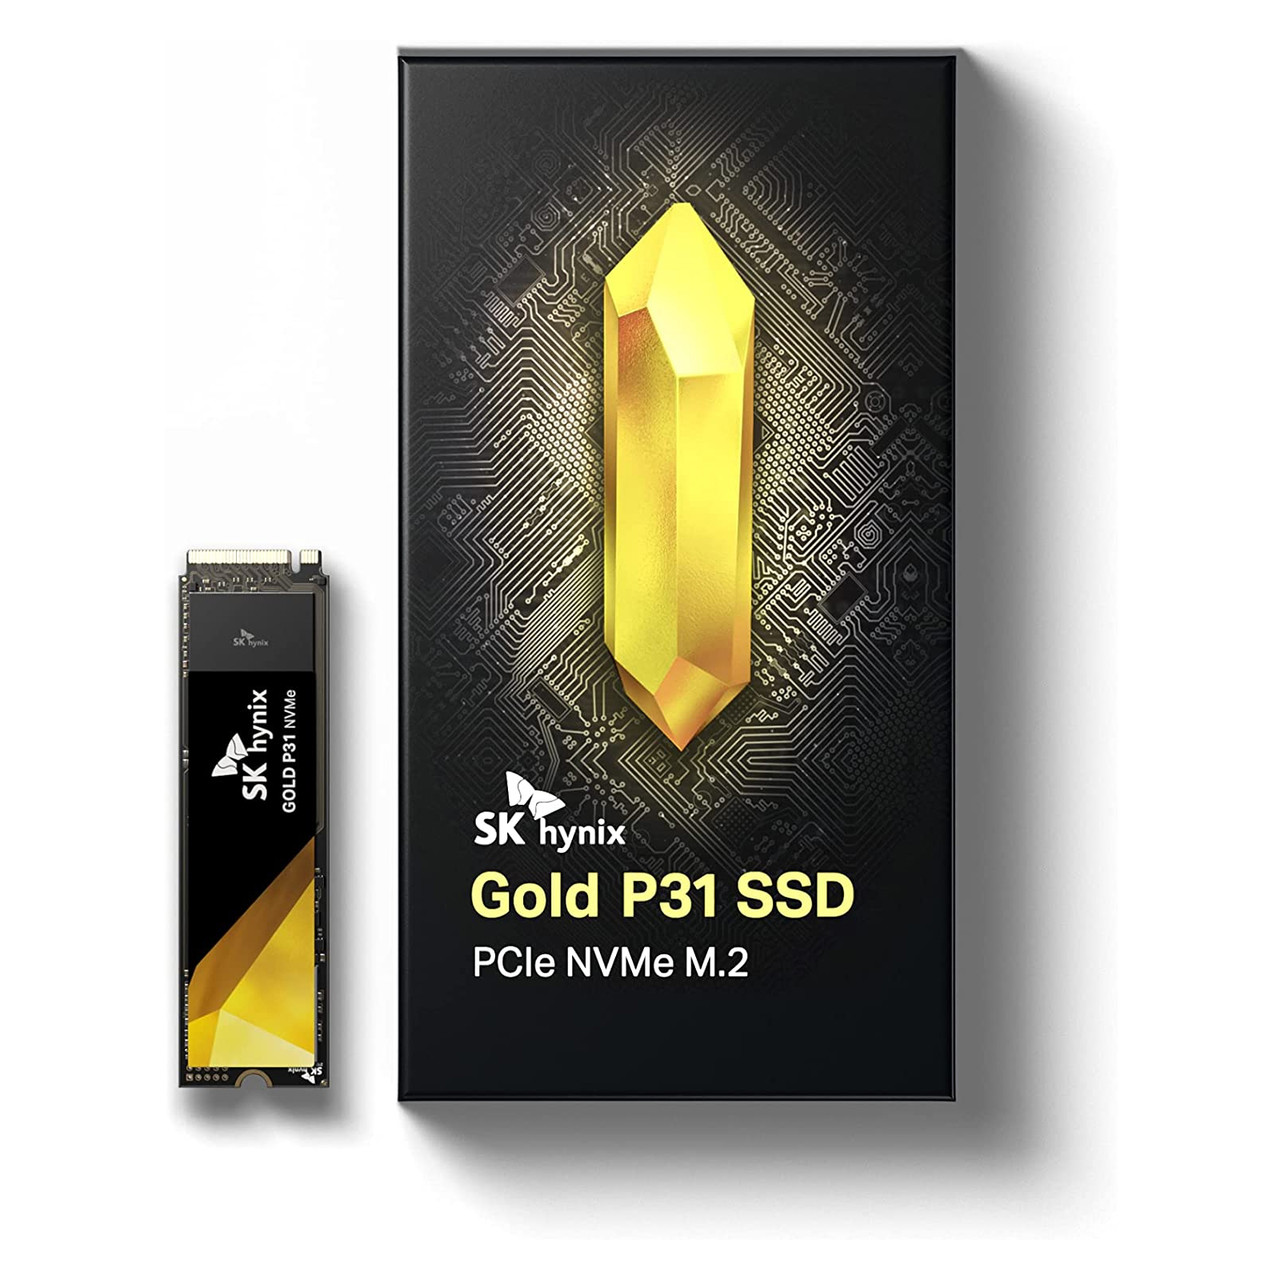 SK Hynix Gold P31 500GB PCIe NVMe Gen3 M.2 2280 Internal SSD, Up to 3500MB/S,Internal Solid State Drive (HFS500GDE9X)